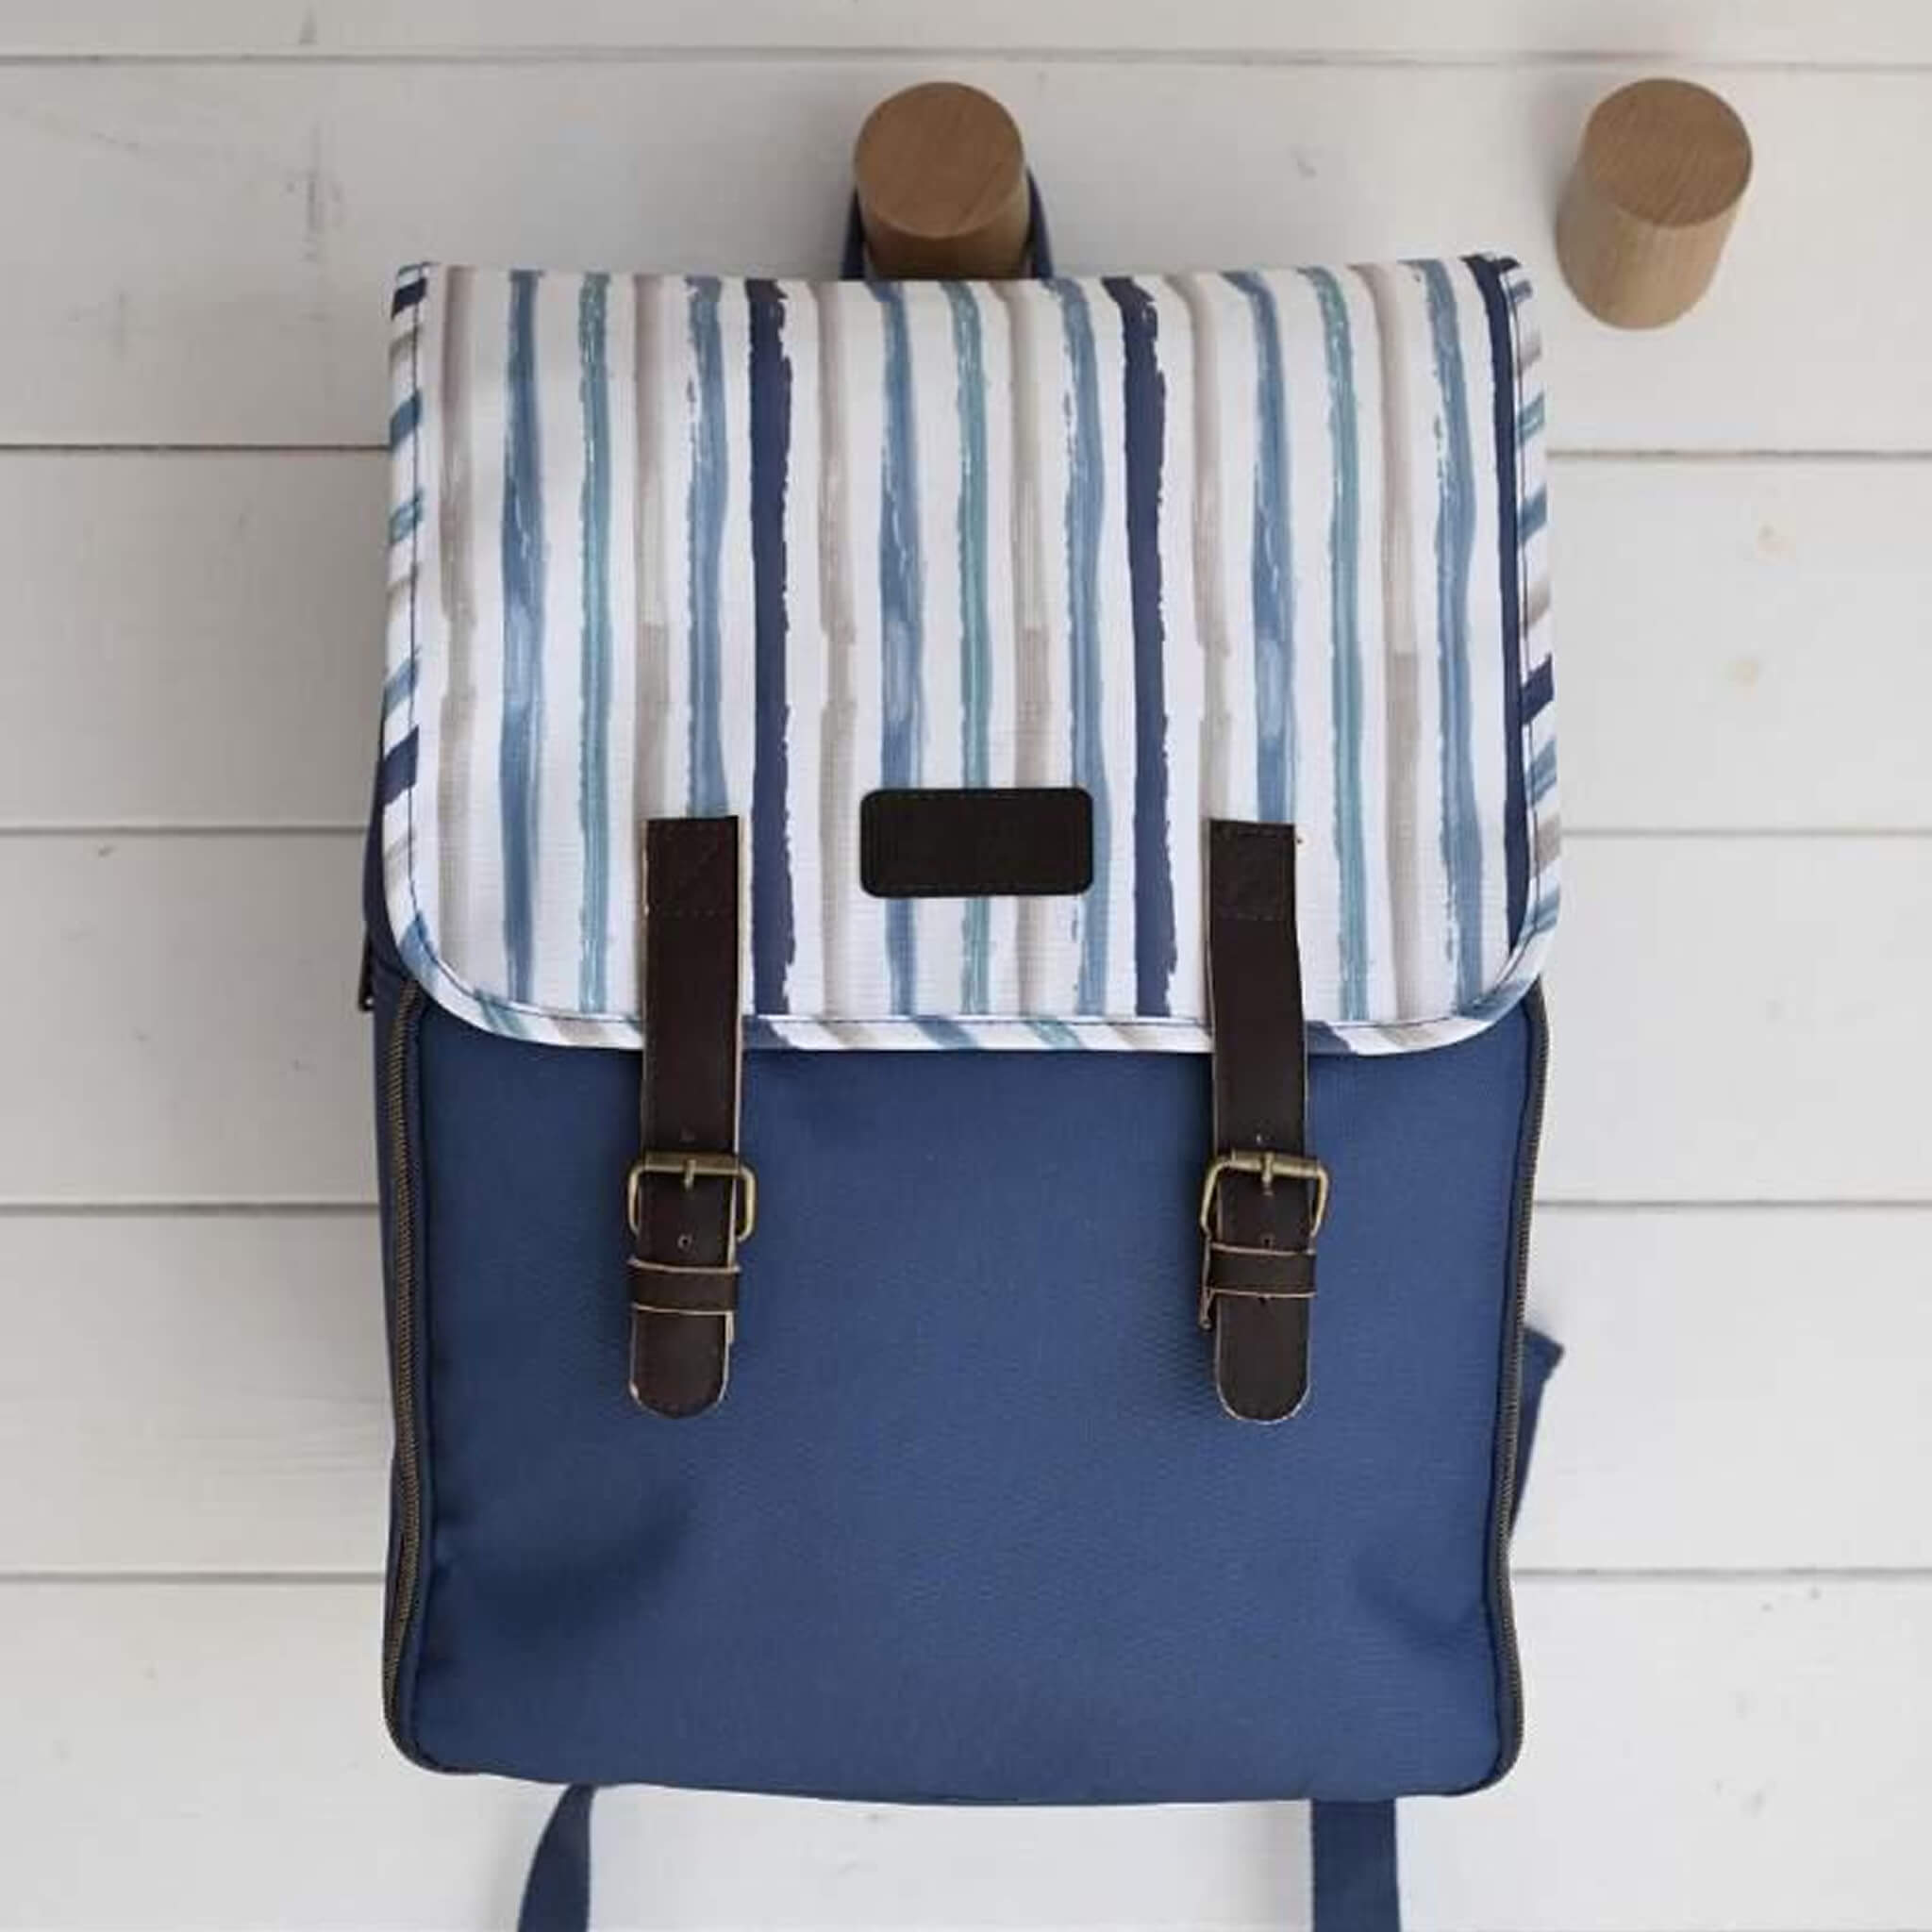 St Ives Picnic Backpack (4 Person) - Alfresco Dining Company